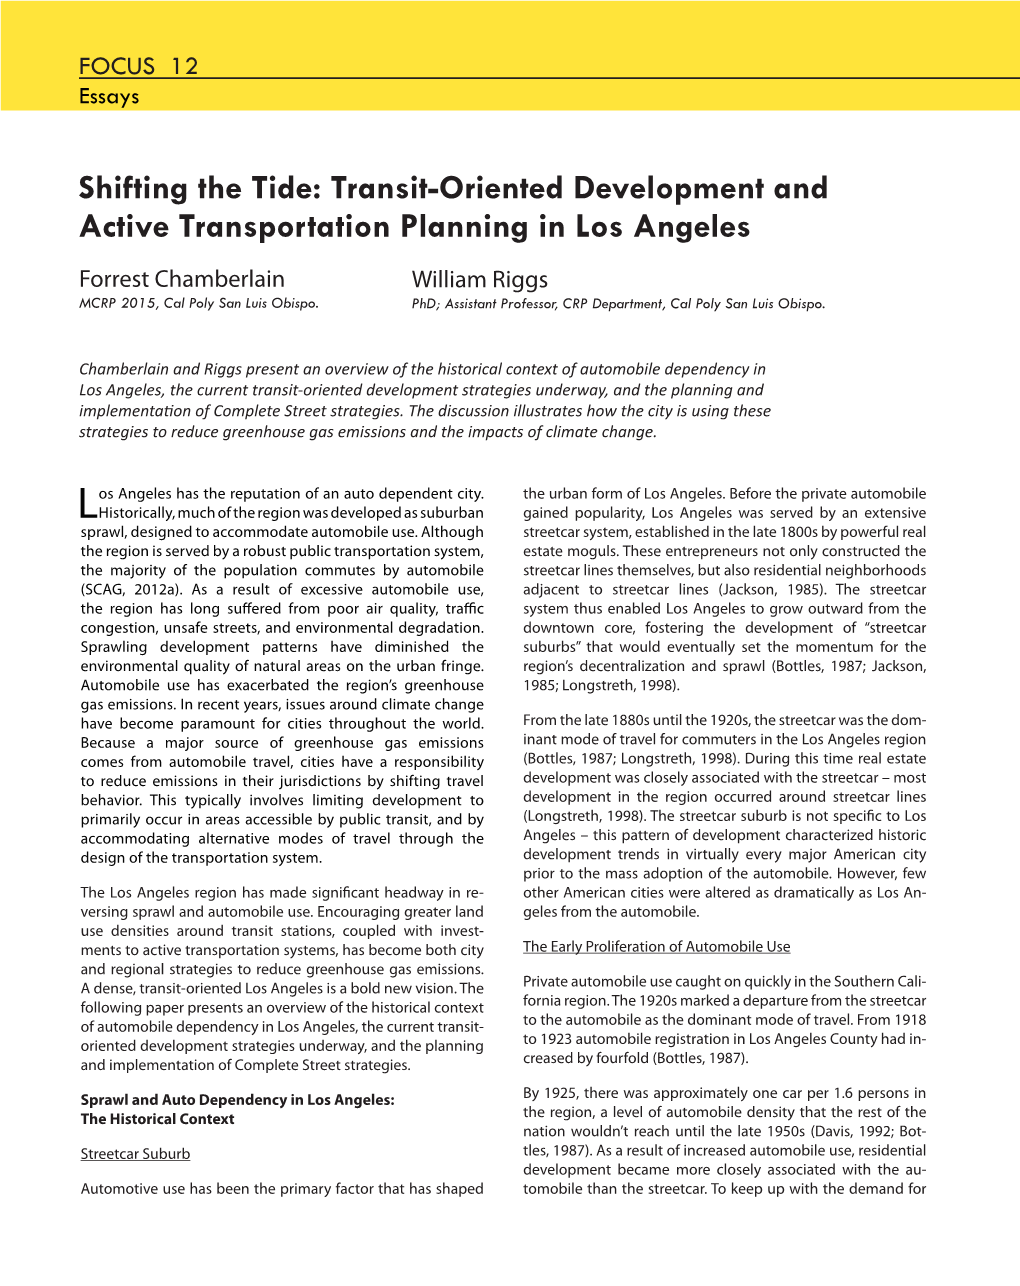 Transit-Oriented Development and Active